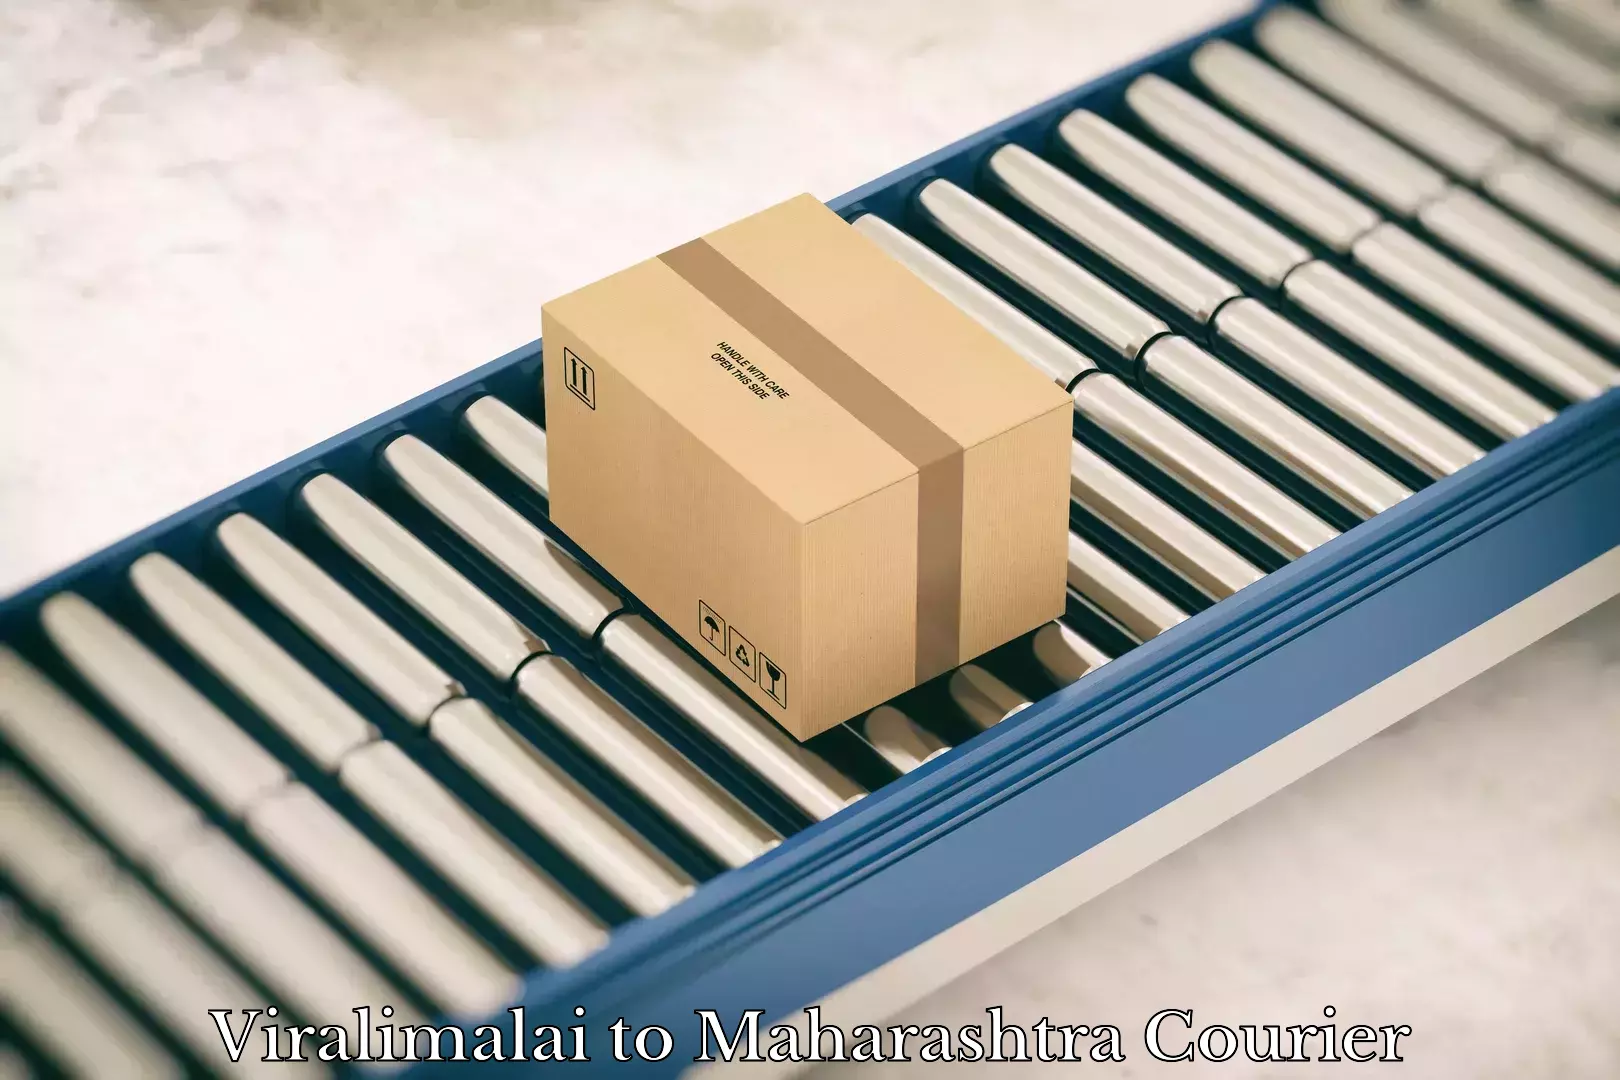 State-of-the-art courier technology Viralimalai to Maharashtra